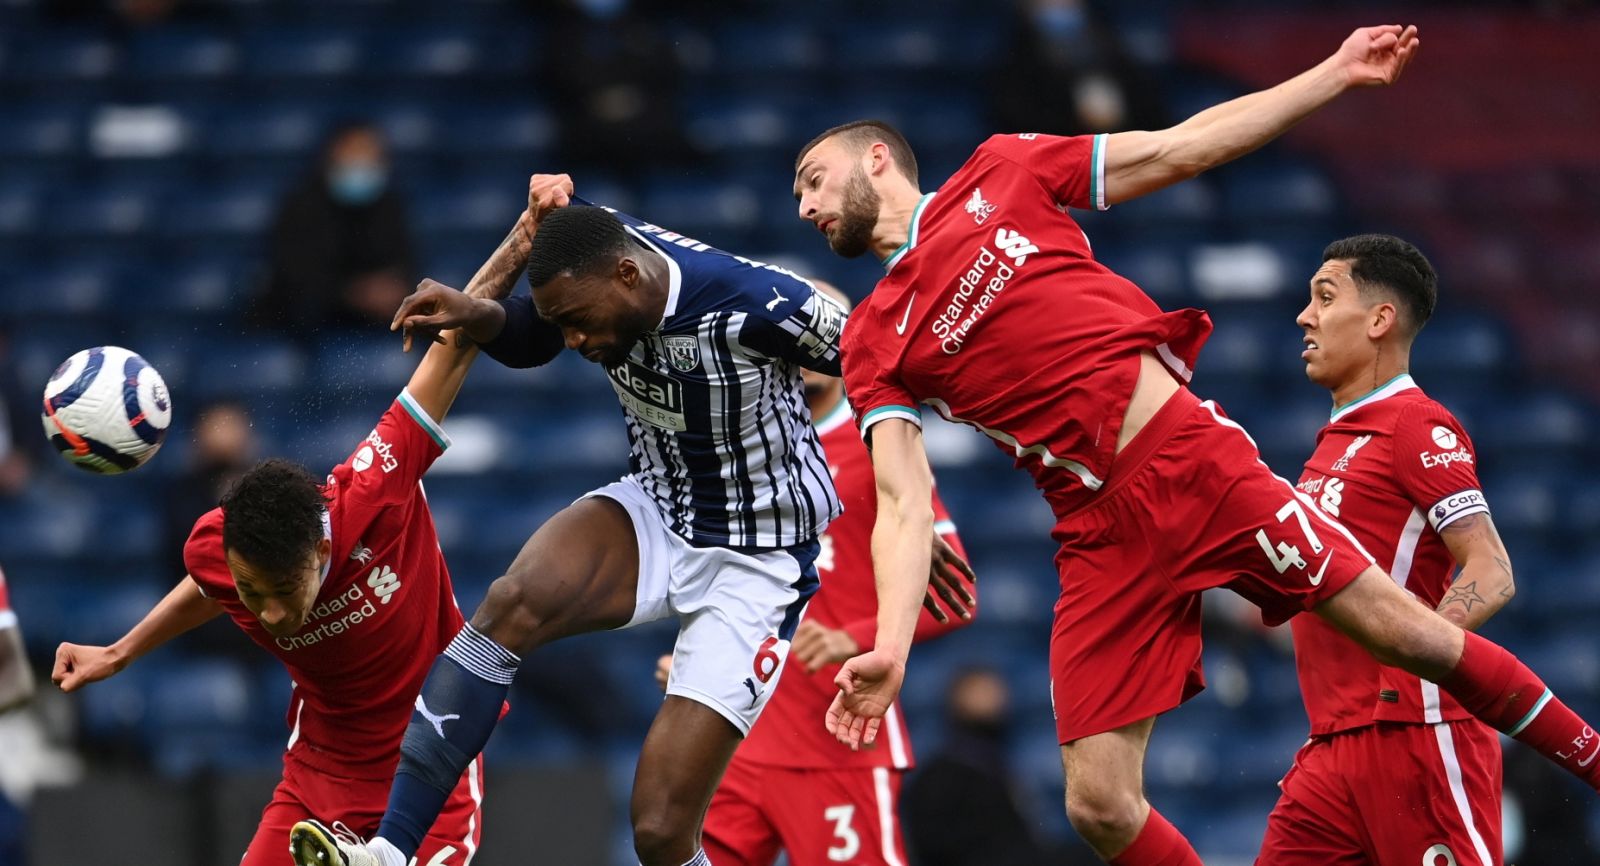 epa09204613 Semi Ajayi (C) of West Bromwich in action against Rhys Williams (L) and Nathaniel Phillips (R) of Liverpool during the English Premier League soccer match between West Bromwich Albion and Liverpool FC in West Bromwich, Britain, 16 May 2021.  EPA/Laurence Griffiths / POOL EDITORIAL USE ONLY. No use with unauthorized audio, video, data, fixture lists, club/league logos or 'live' services. Online in-match use limited to 120 images, no video emulation. No use in betting, games or single club/league/player publications.